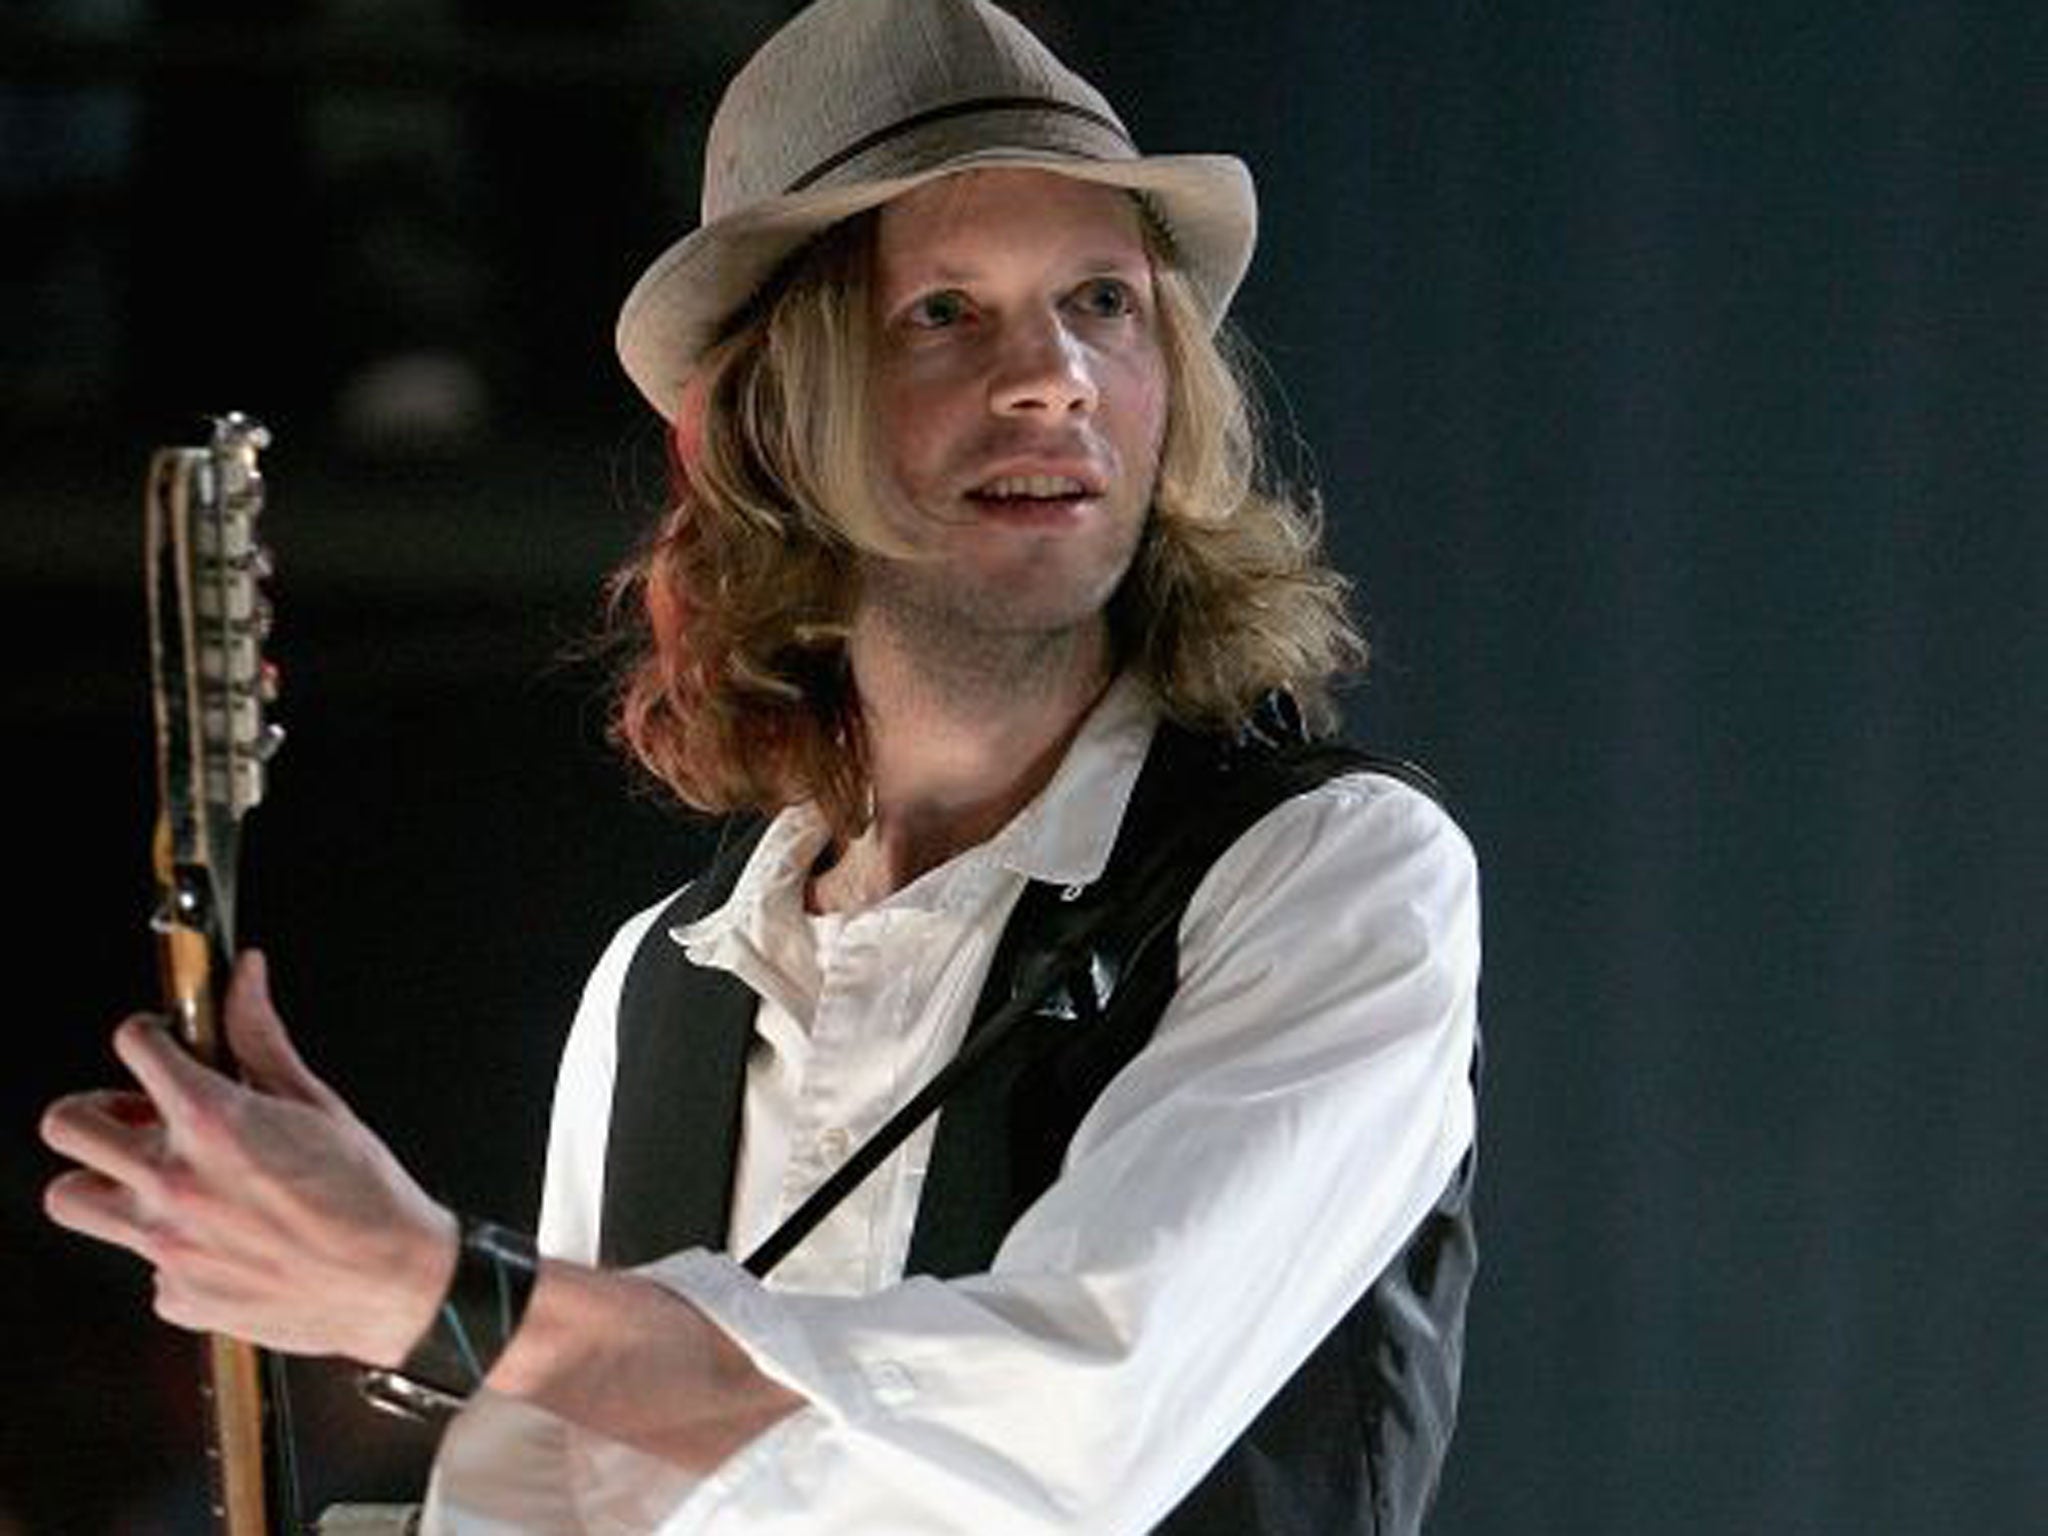 Caught in the Net is driven crazy as Beck takes on Bowie